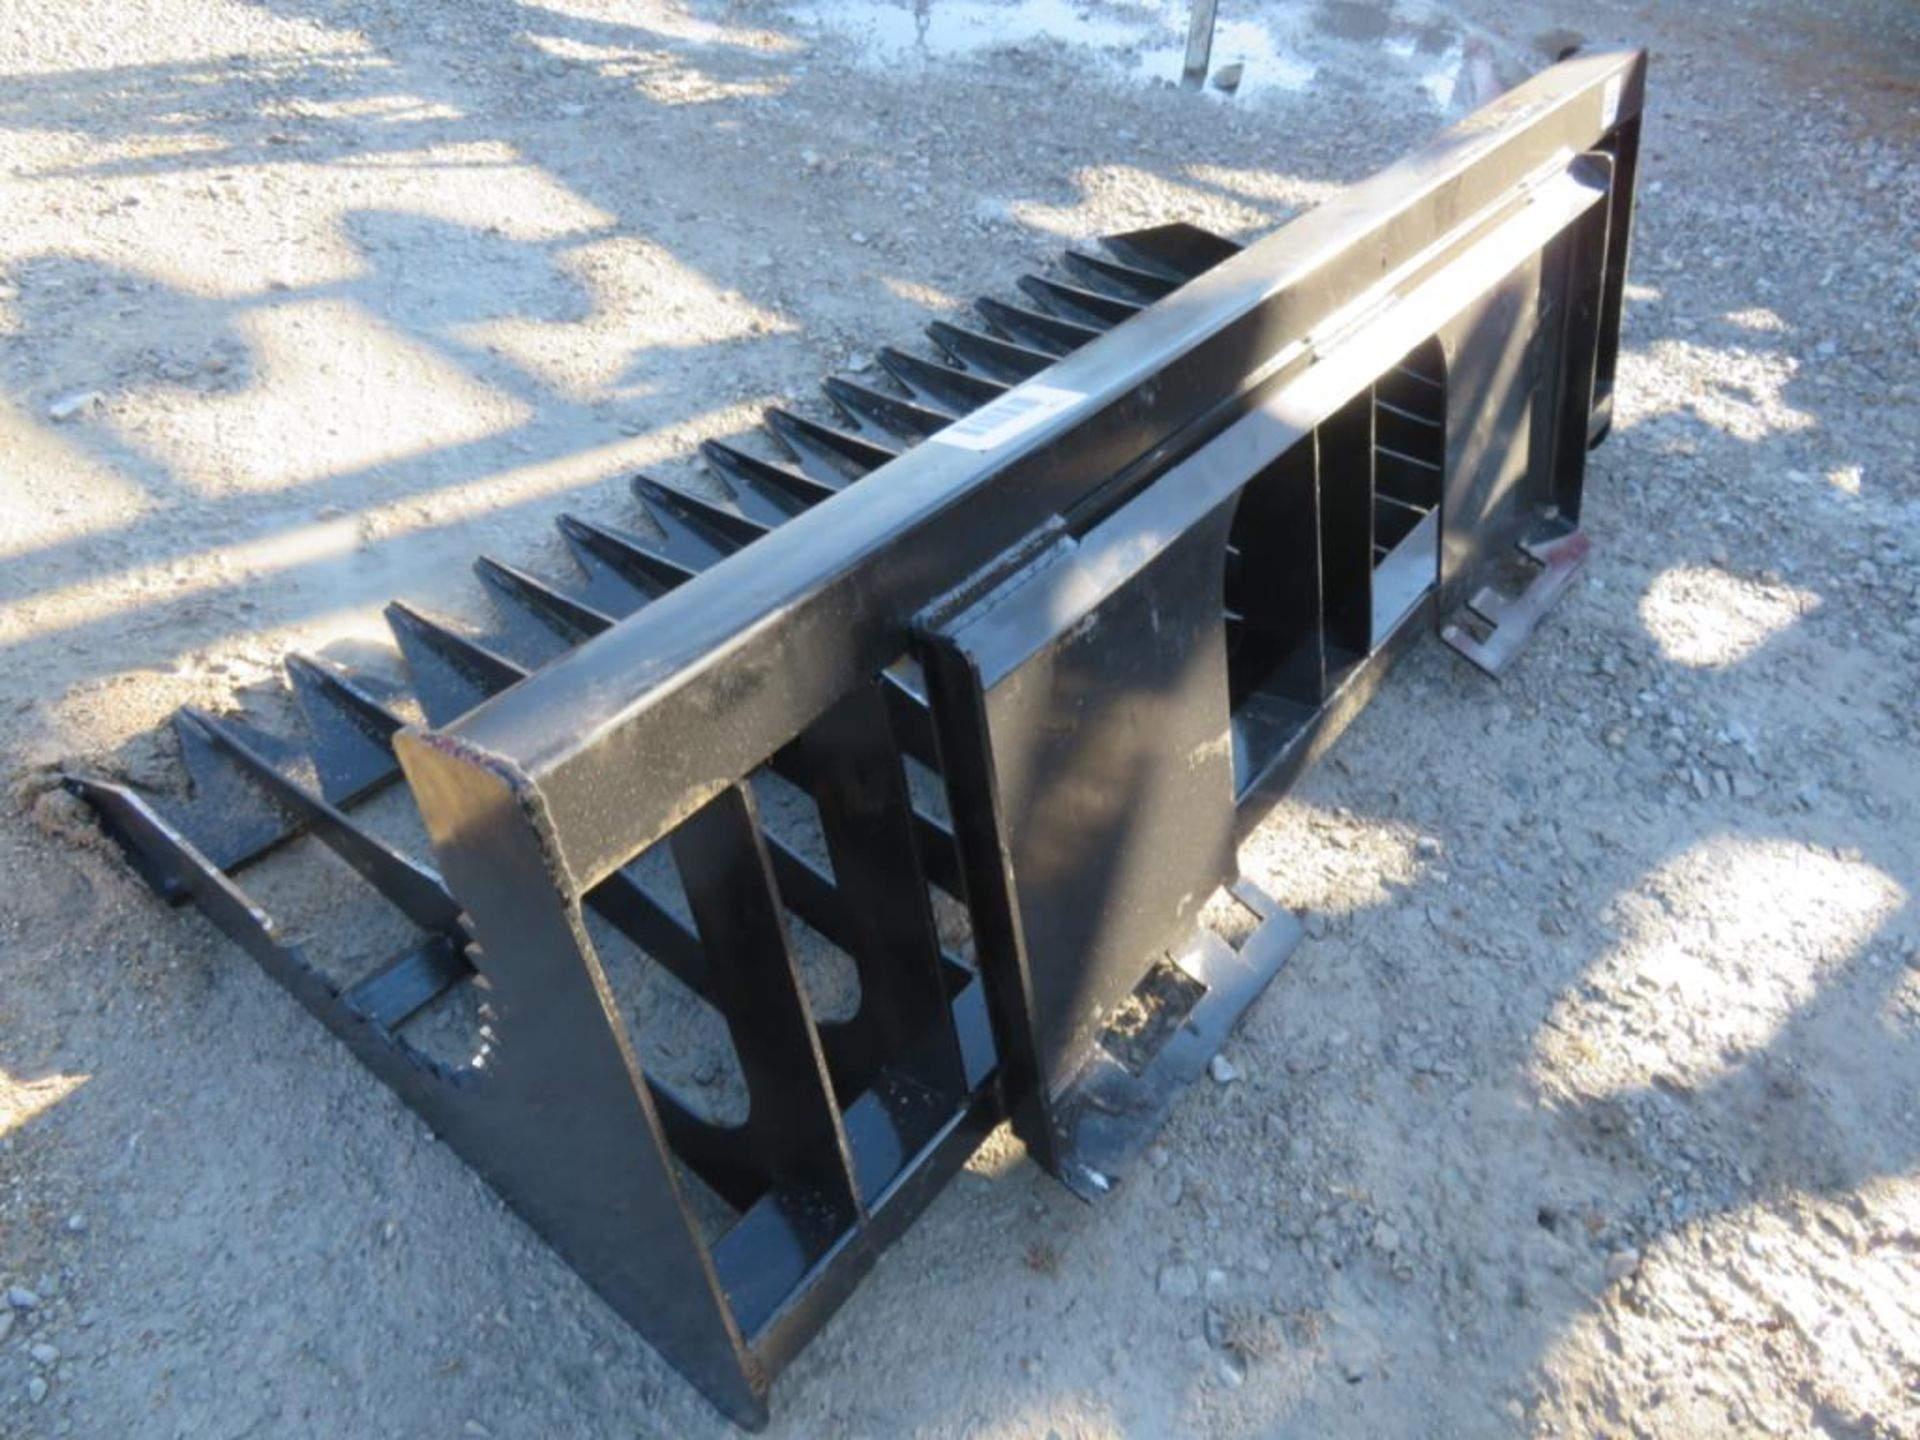 66 Rock Bucket with 4" Tine Spacing Brute brand skid steer attachment - Image 2 of 2